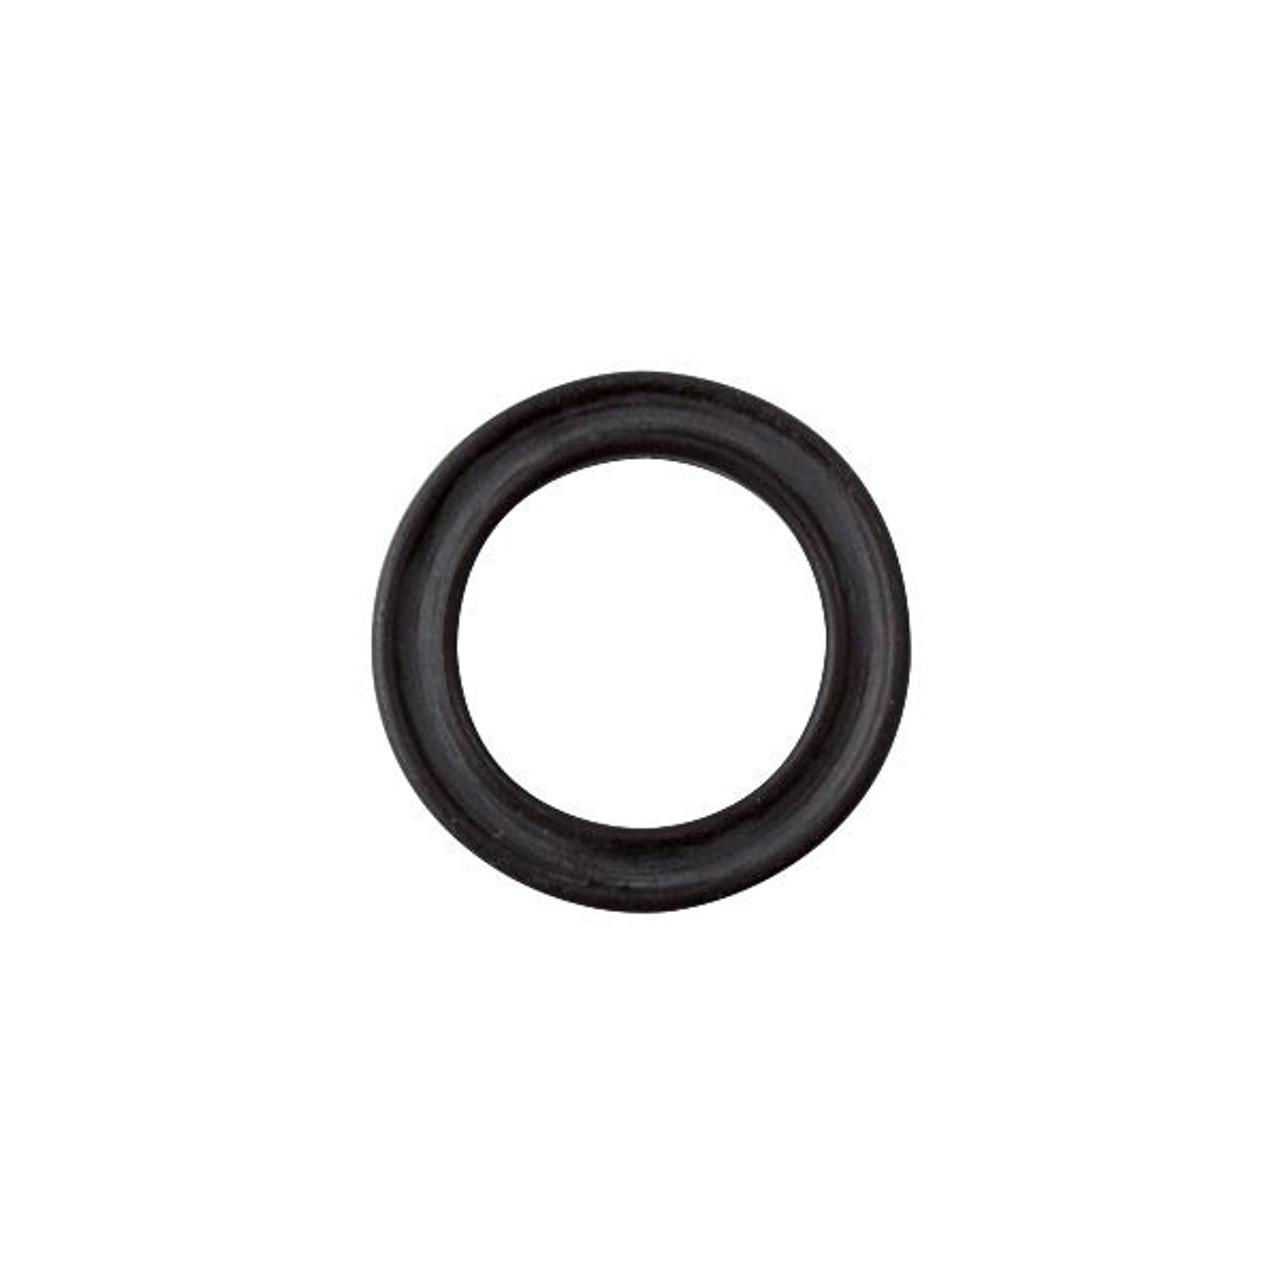 Flat Rubber O Ring Gasket Seals, High Quality Flat Rubber O Ring Gasket  Seals on Bossgoo.com